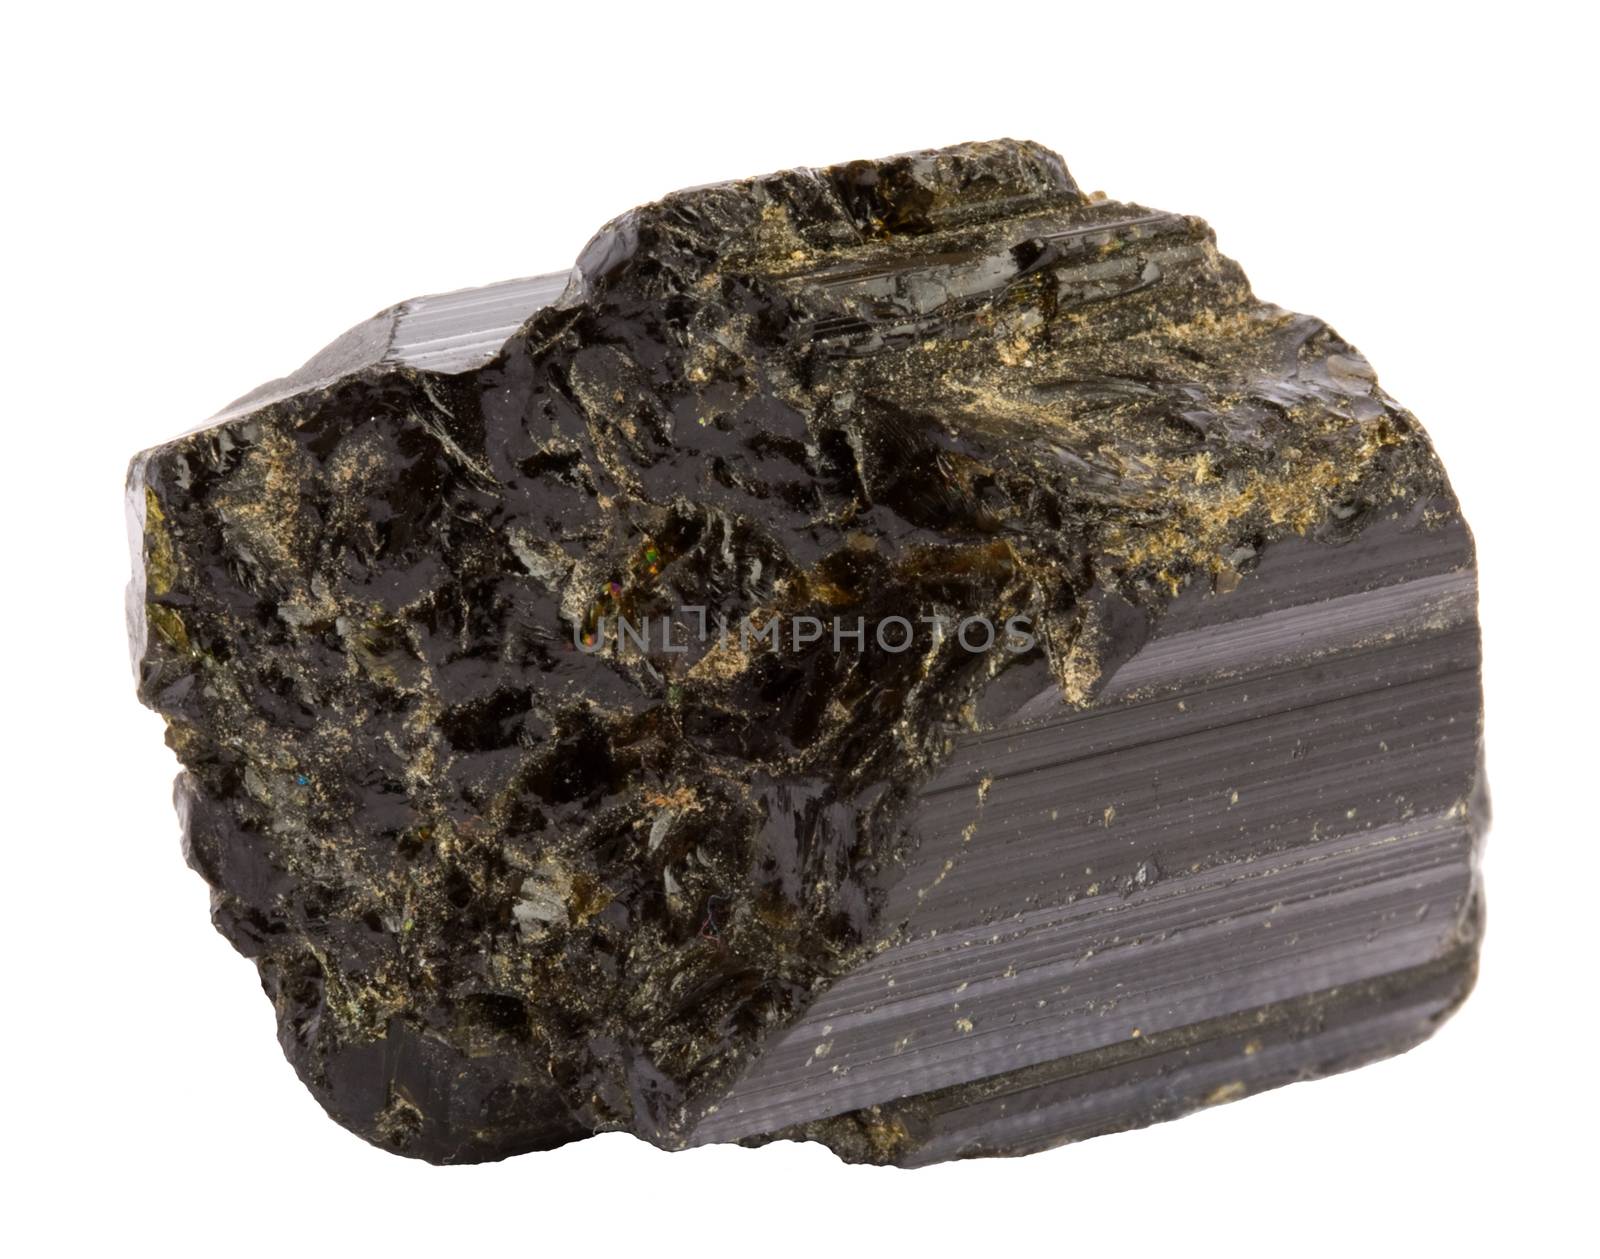 Single piece of tourmaline (schorl or dravite) isolated on white. Showing light refraction in different colors on the rough side